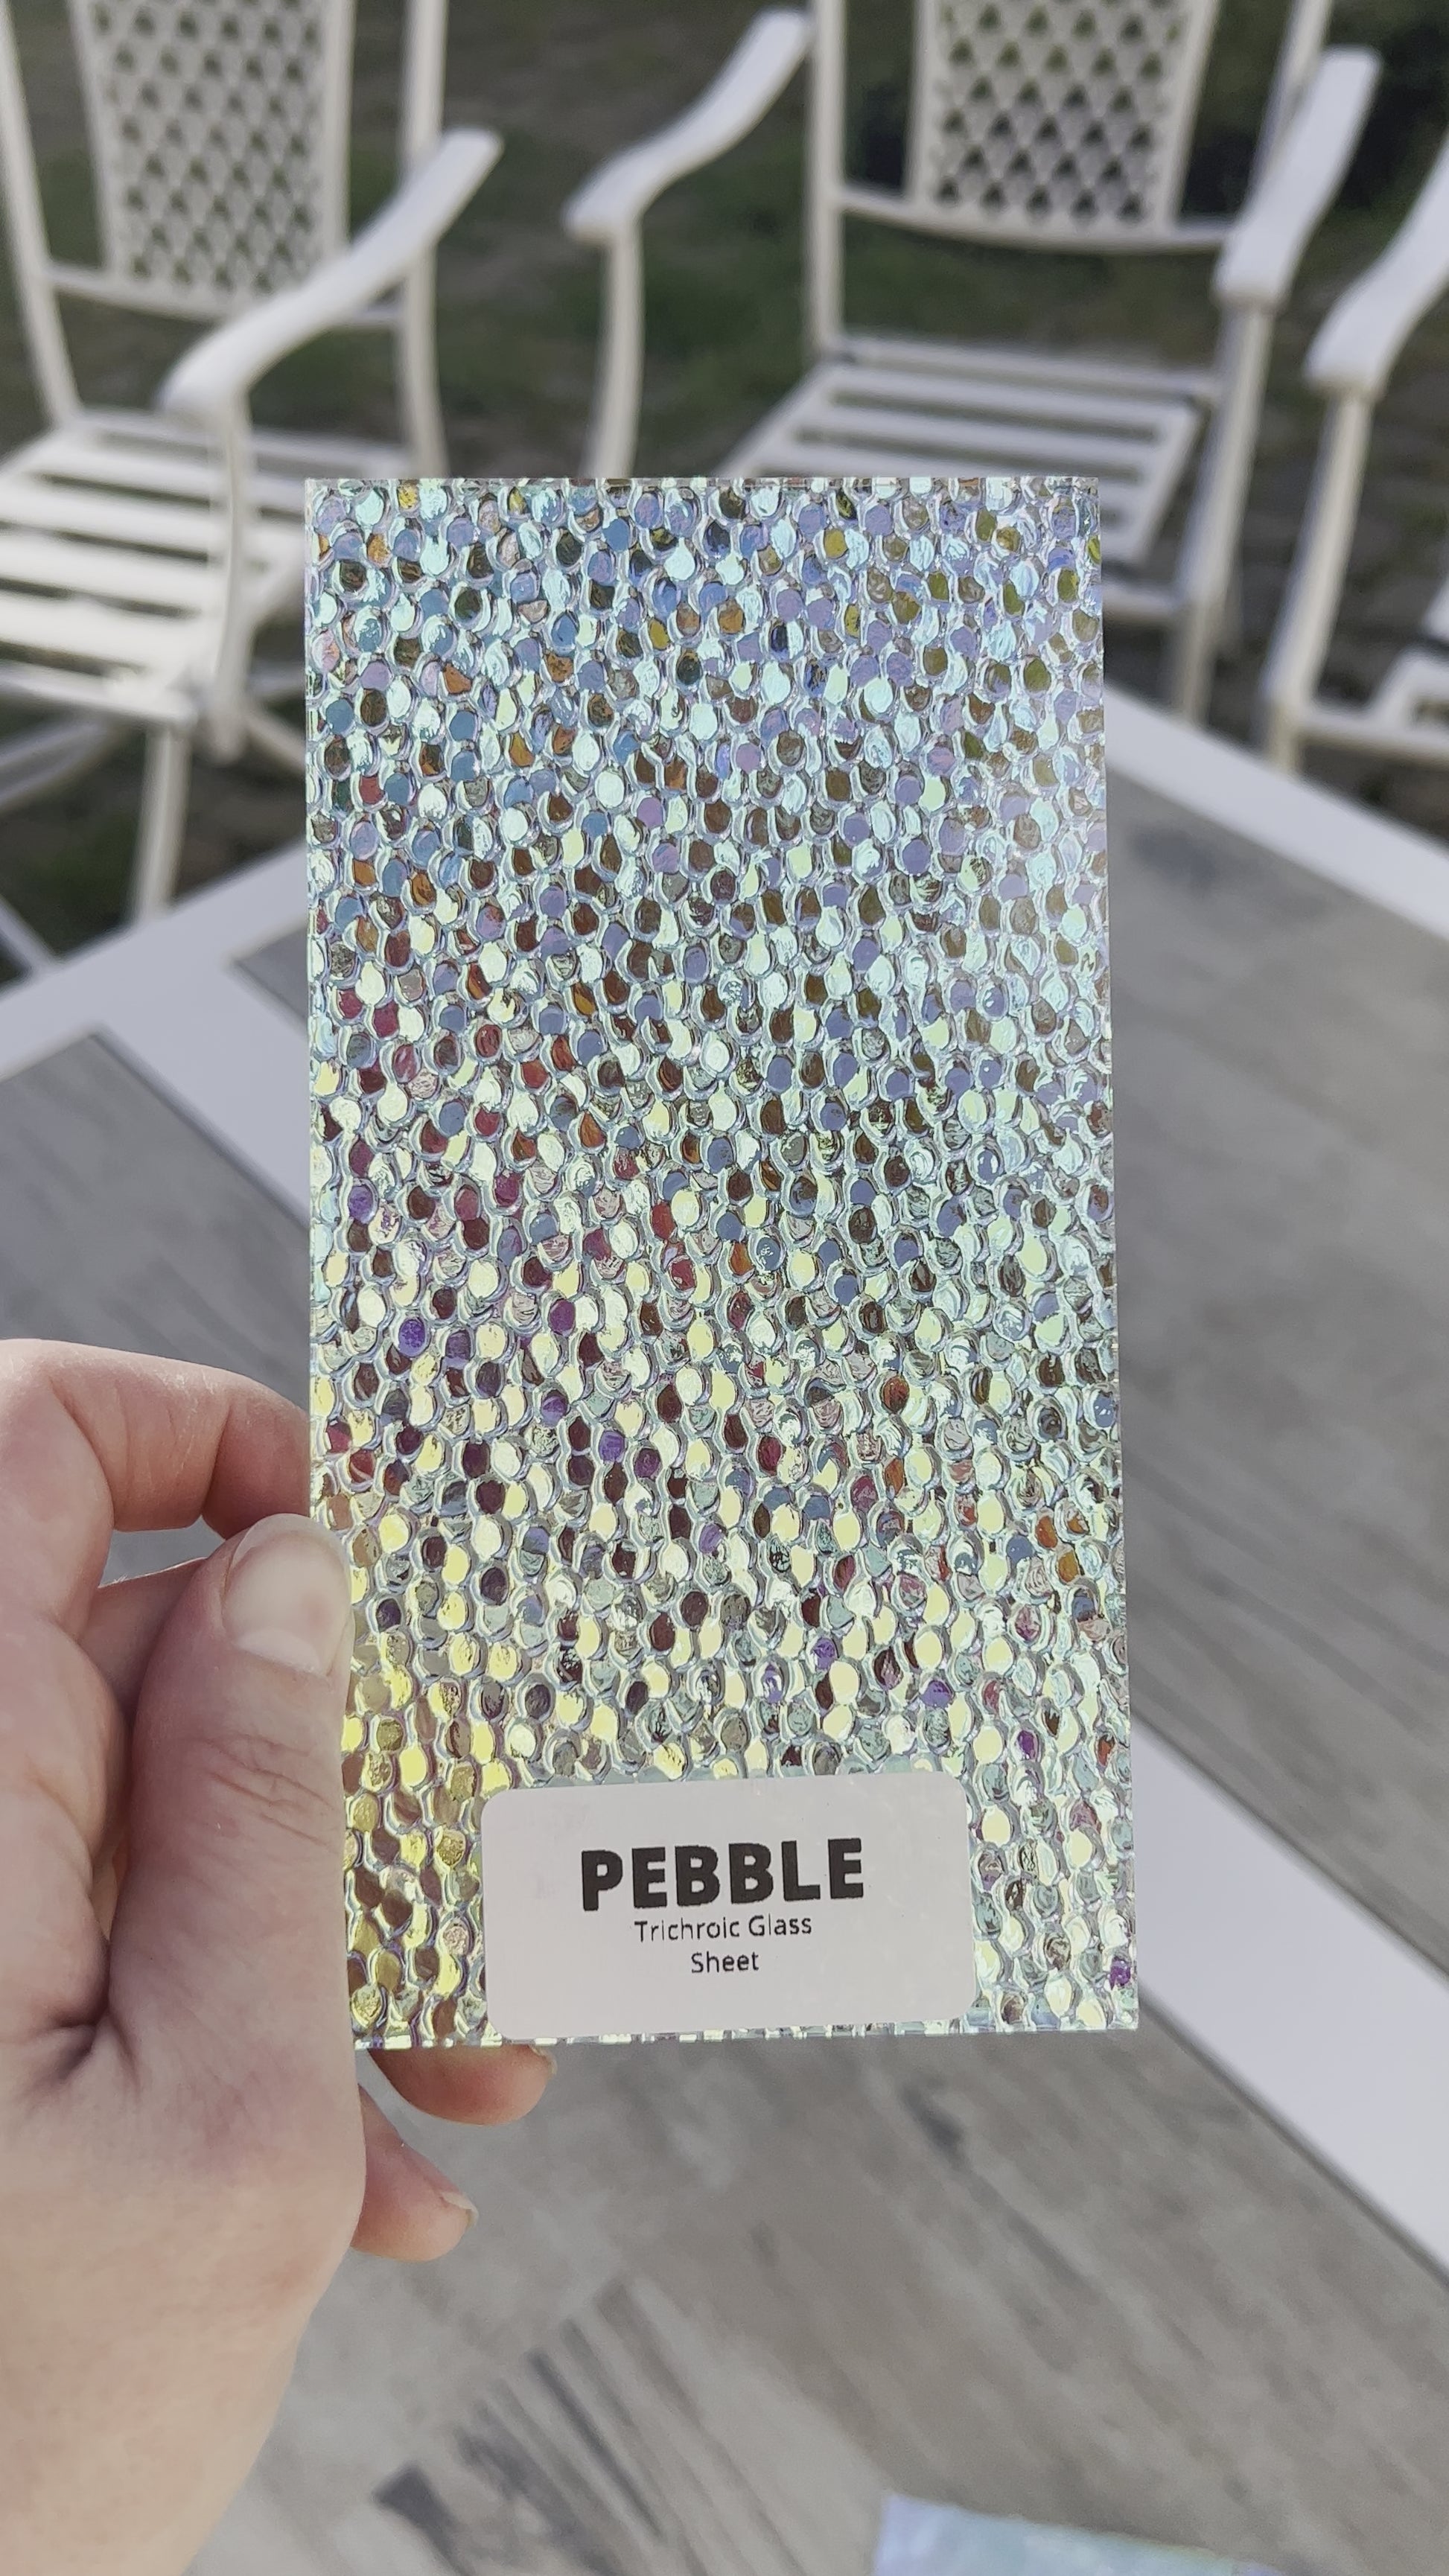 Trichroic Glass Sheets - Pebble – The Sprouted Plate